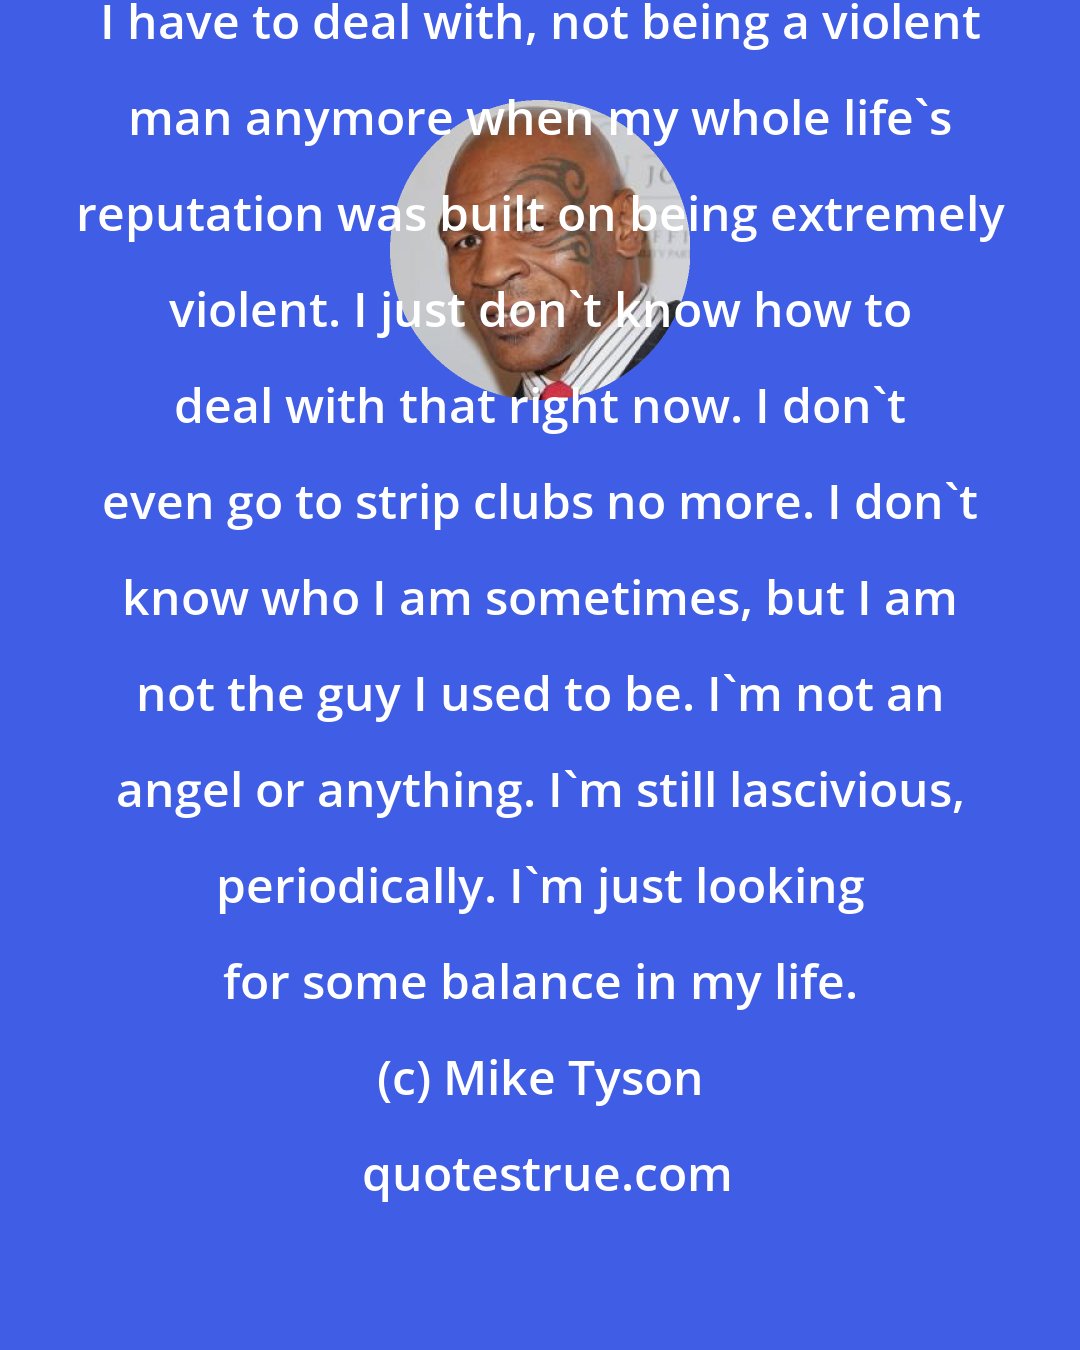 Mike Tyson: This is a weird feeling in my life I have to deal with, not being a violent man anymore when my whole life's reputation was built on being extremely violent. I just don't know how to deal with that right now. I don't even go to strip clubs no more. I don't know who I am sometimes, but I am not the guy I used to be. I'm not an angel or anything. I'm still lascivious, periodically. I'm just looking for some balance in my life.